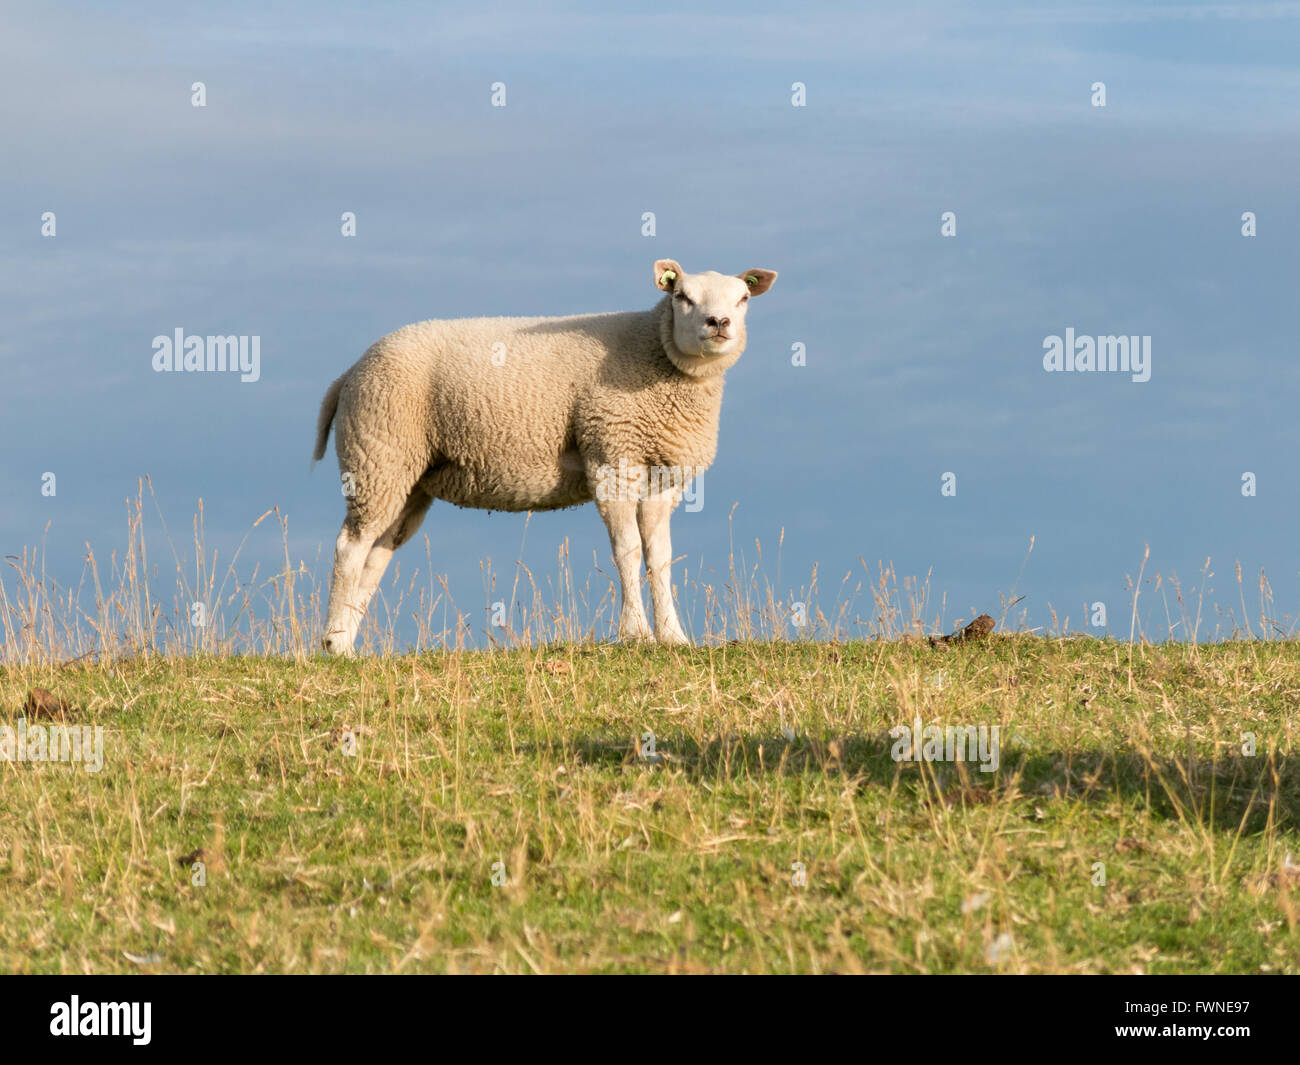 Portrait of one sheep standing in the grass on a polder dyke, Netherlands Stock Photo